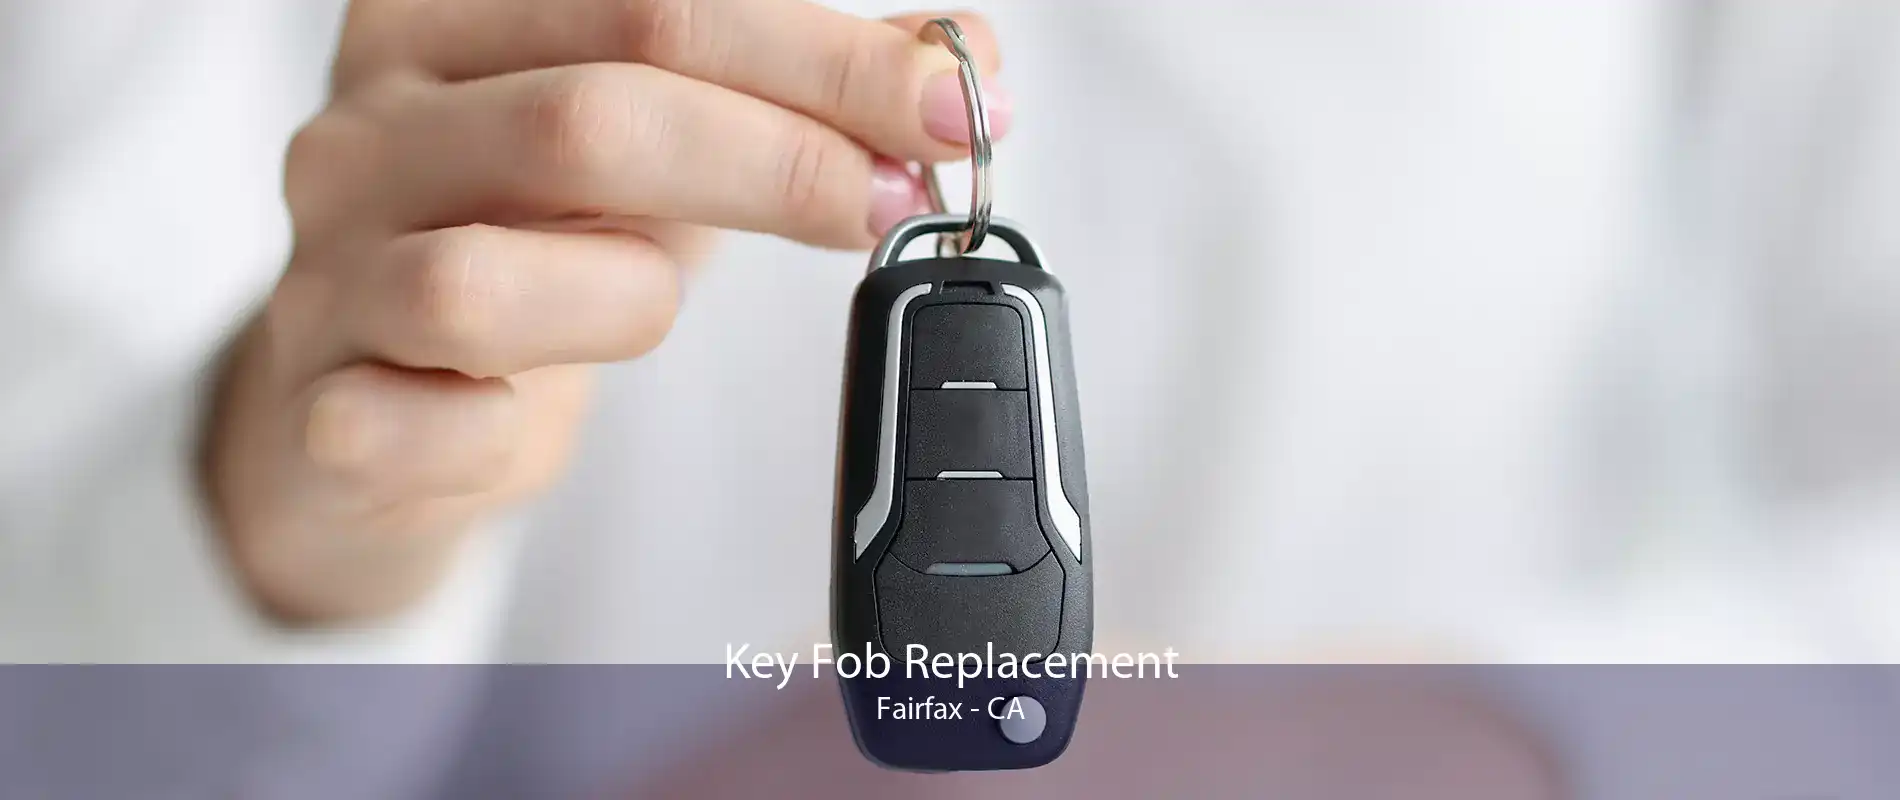 Key Fob Replacement Fairfax - CA